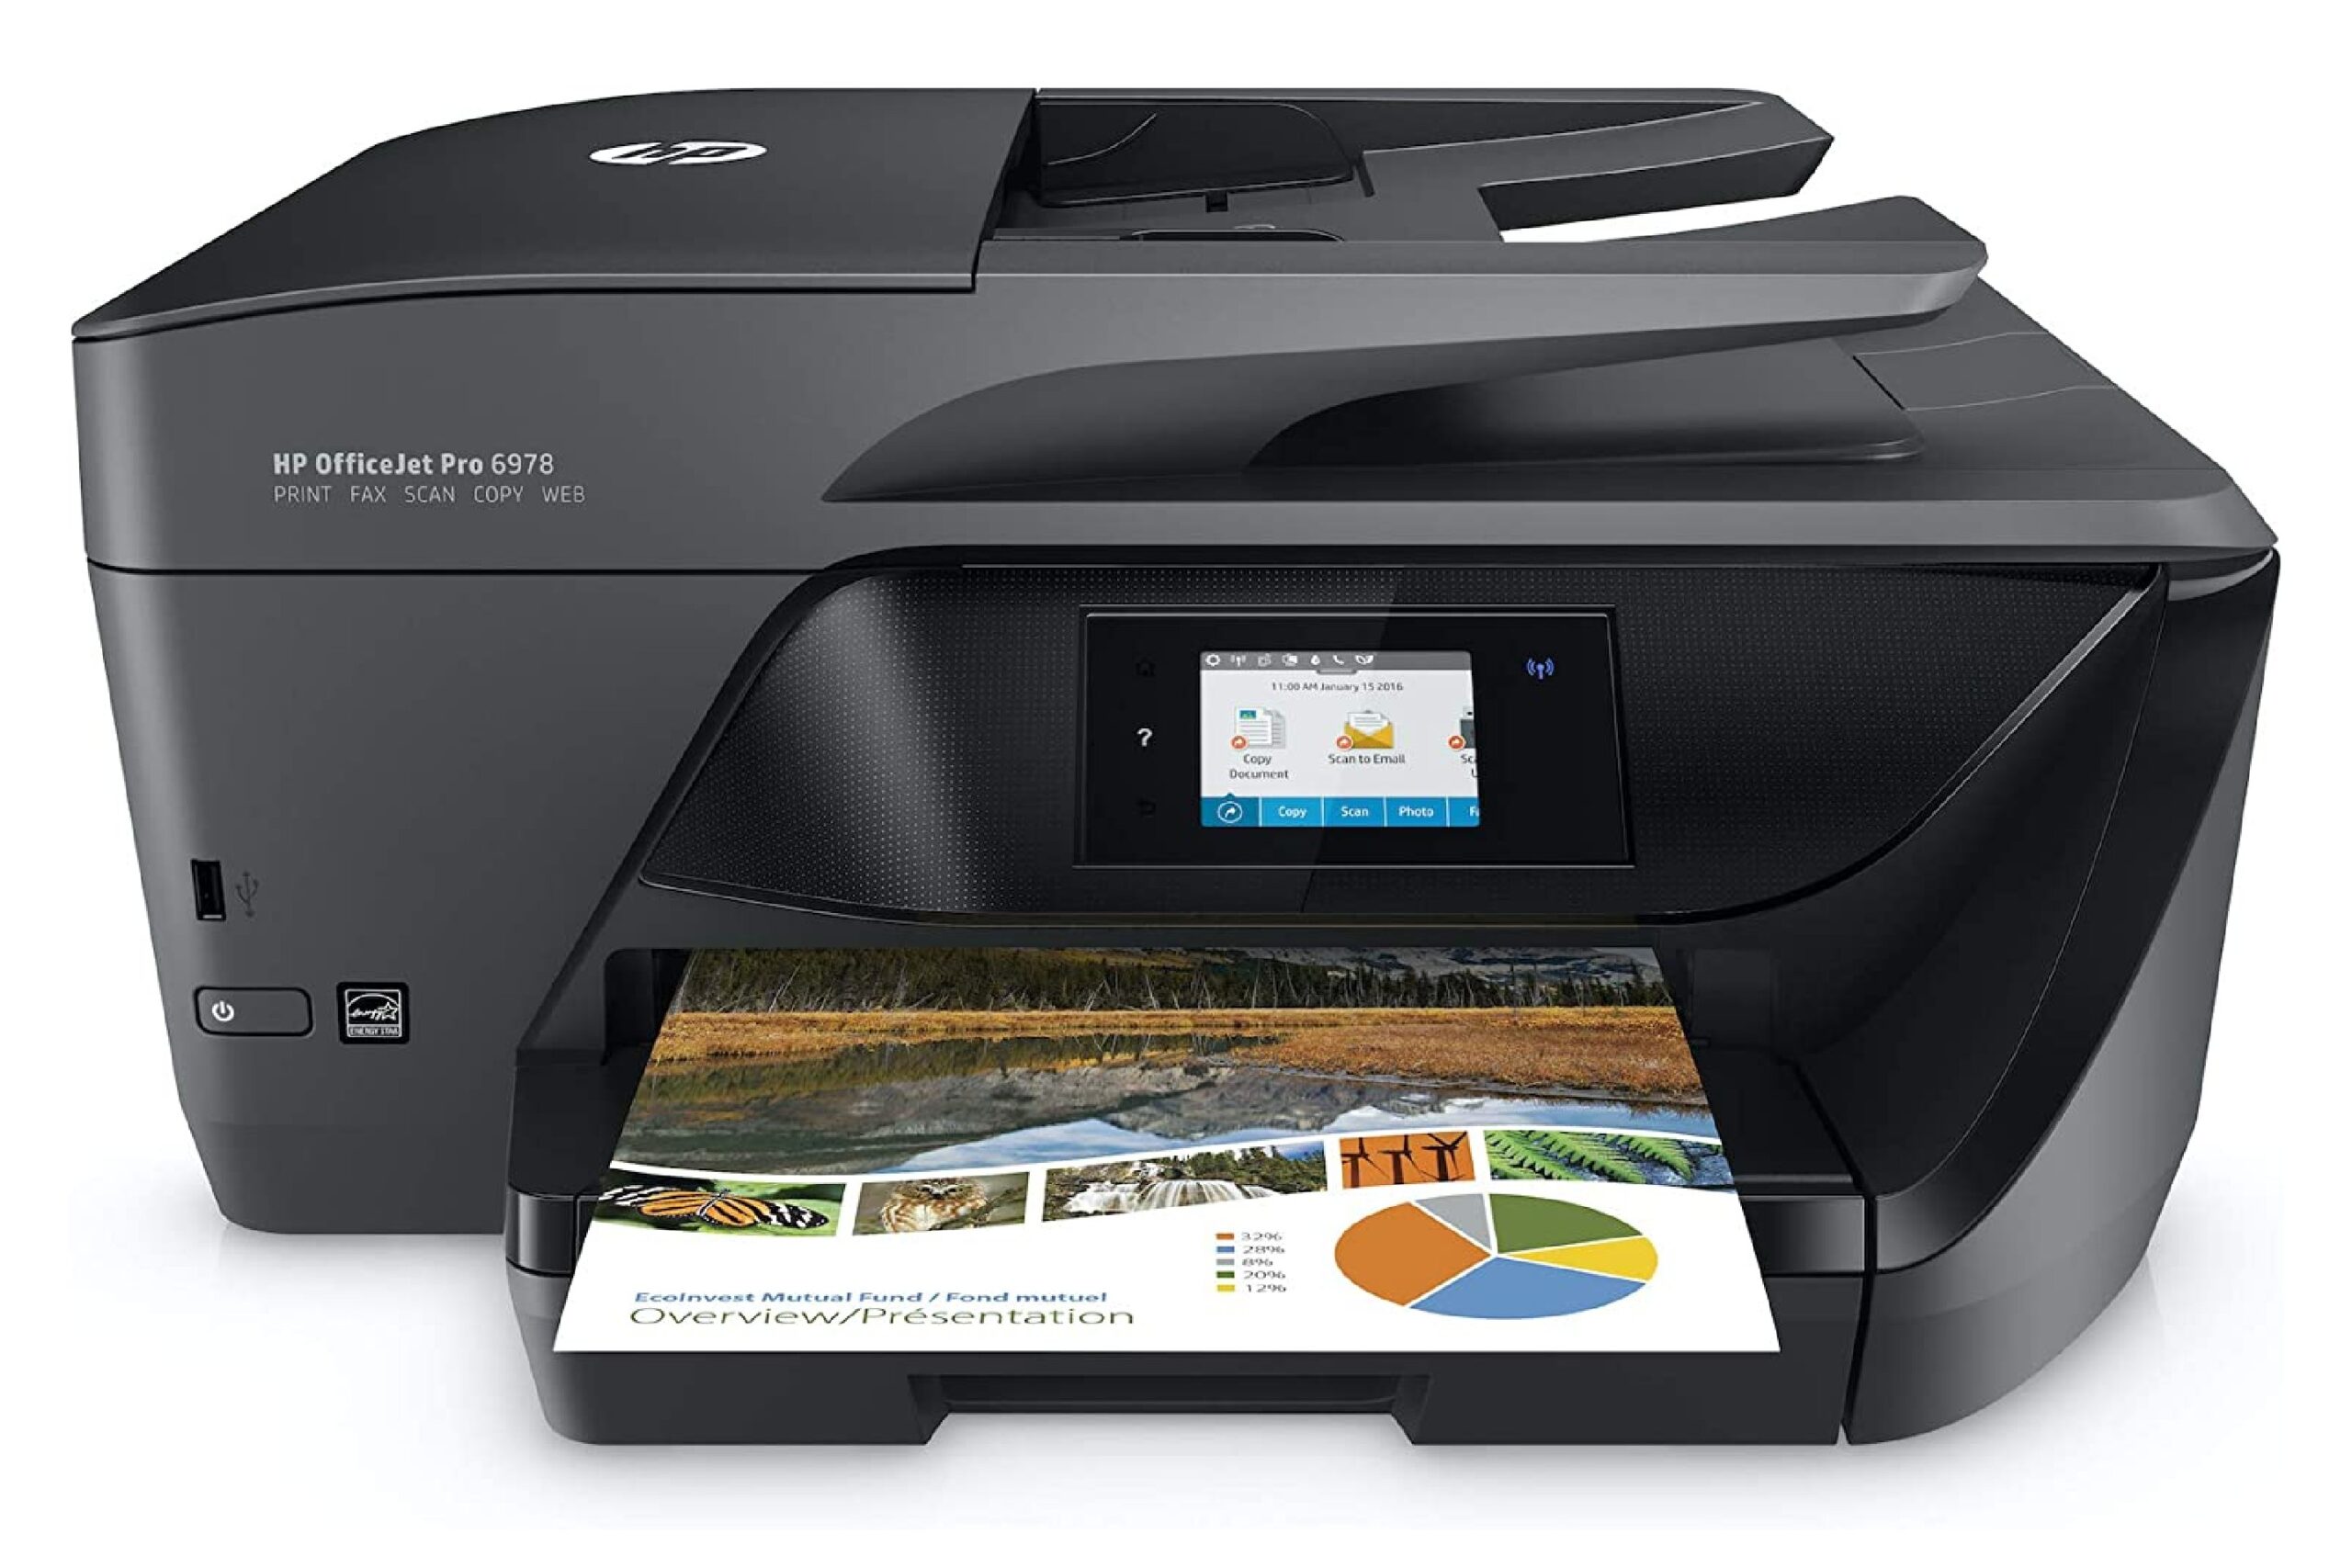 HP OfficeJet Pro All-in-One Printer